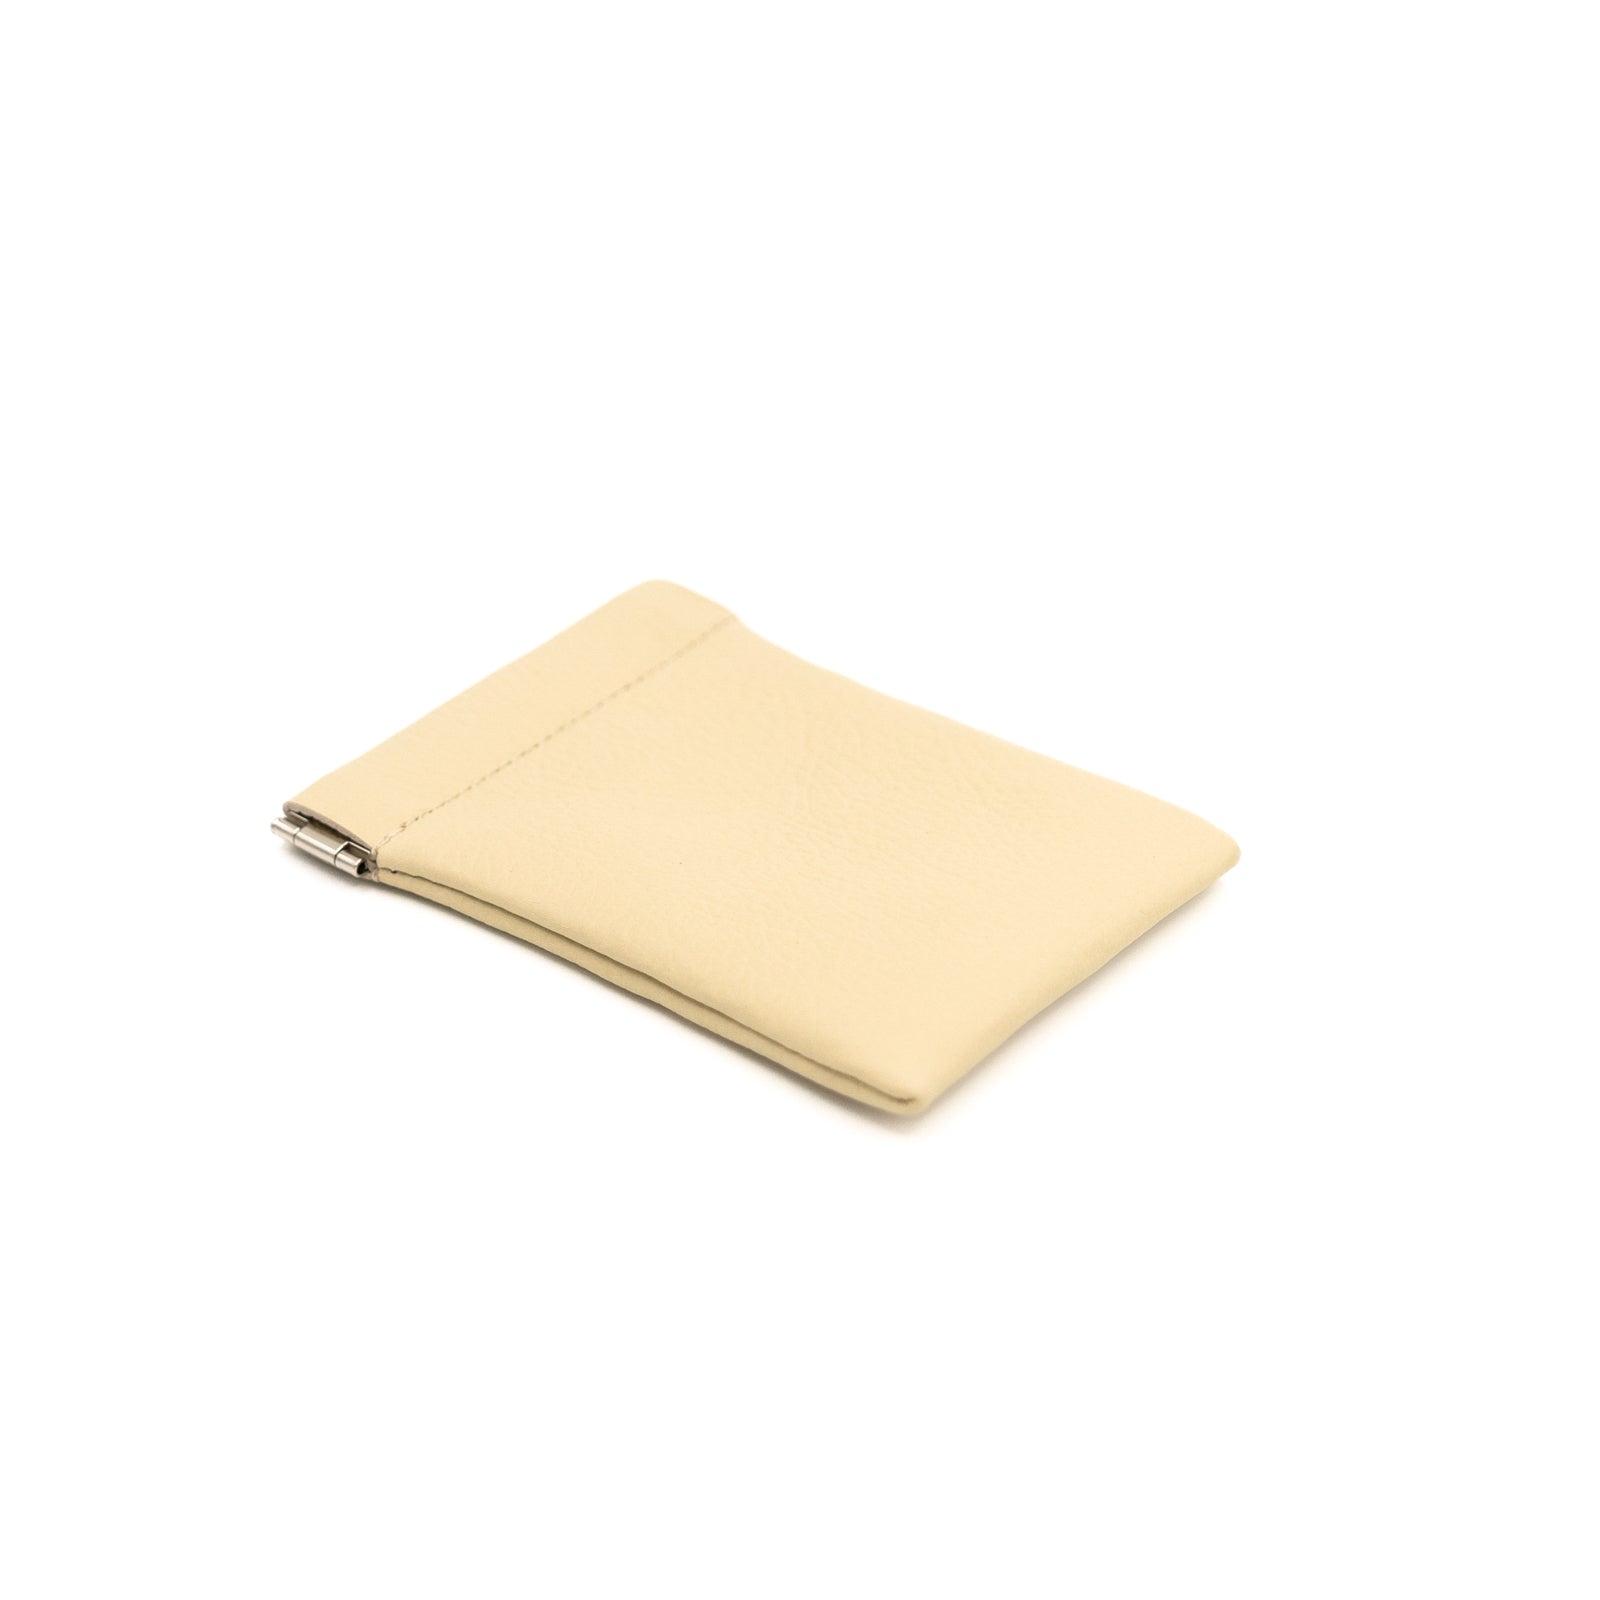 [Service item] Rectangular spring mouth pouch M / Cuir Marsh